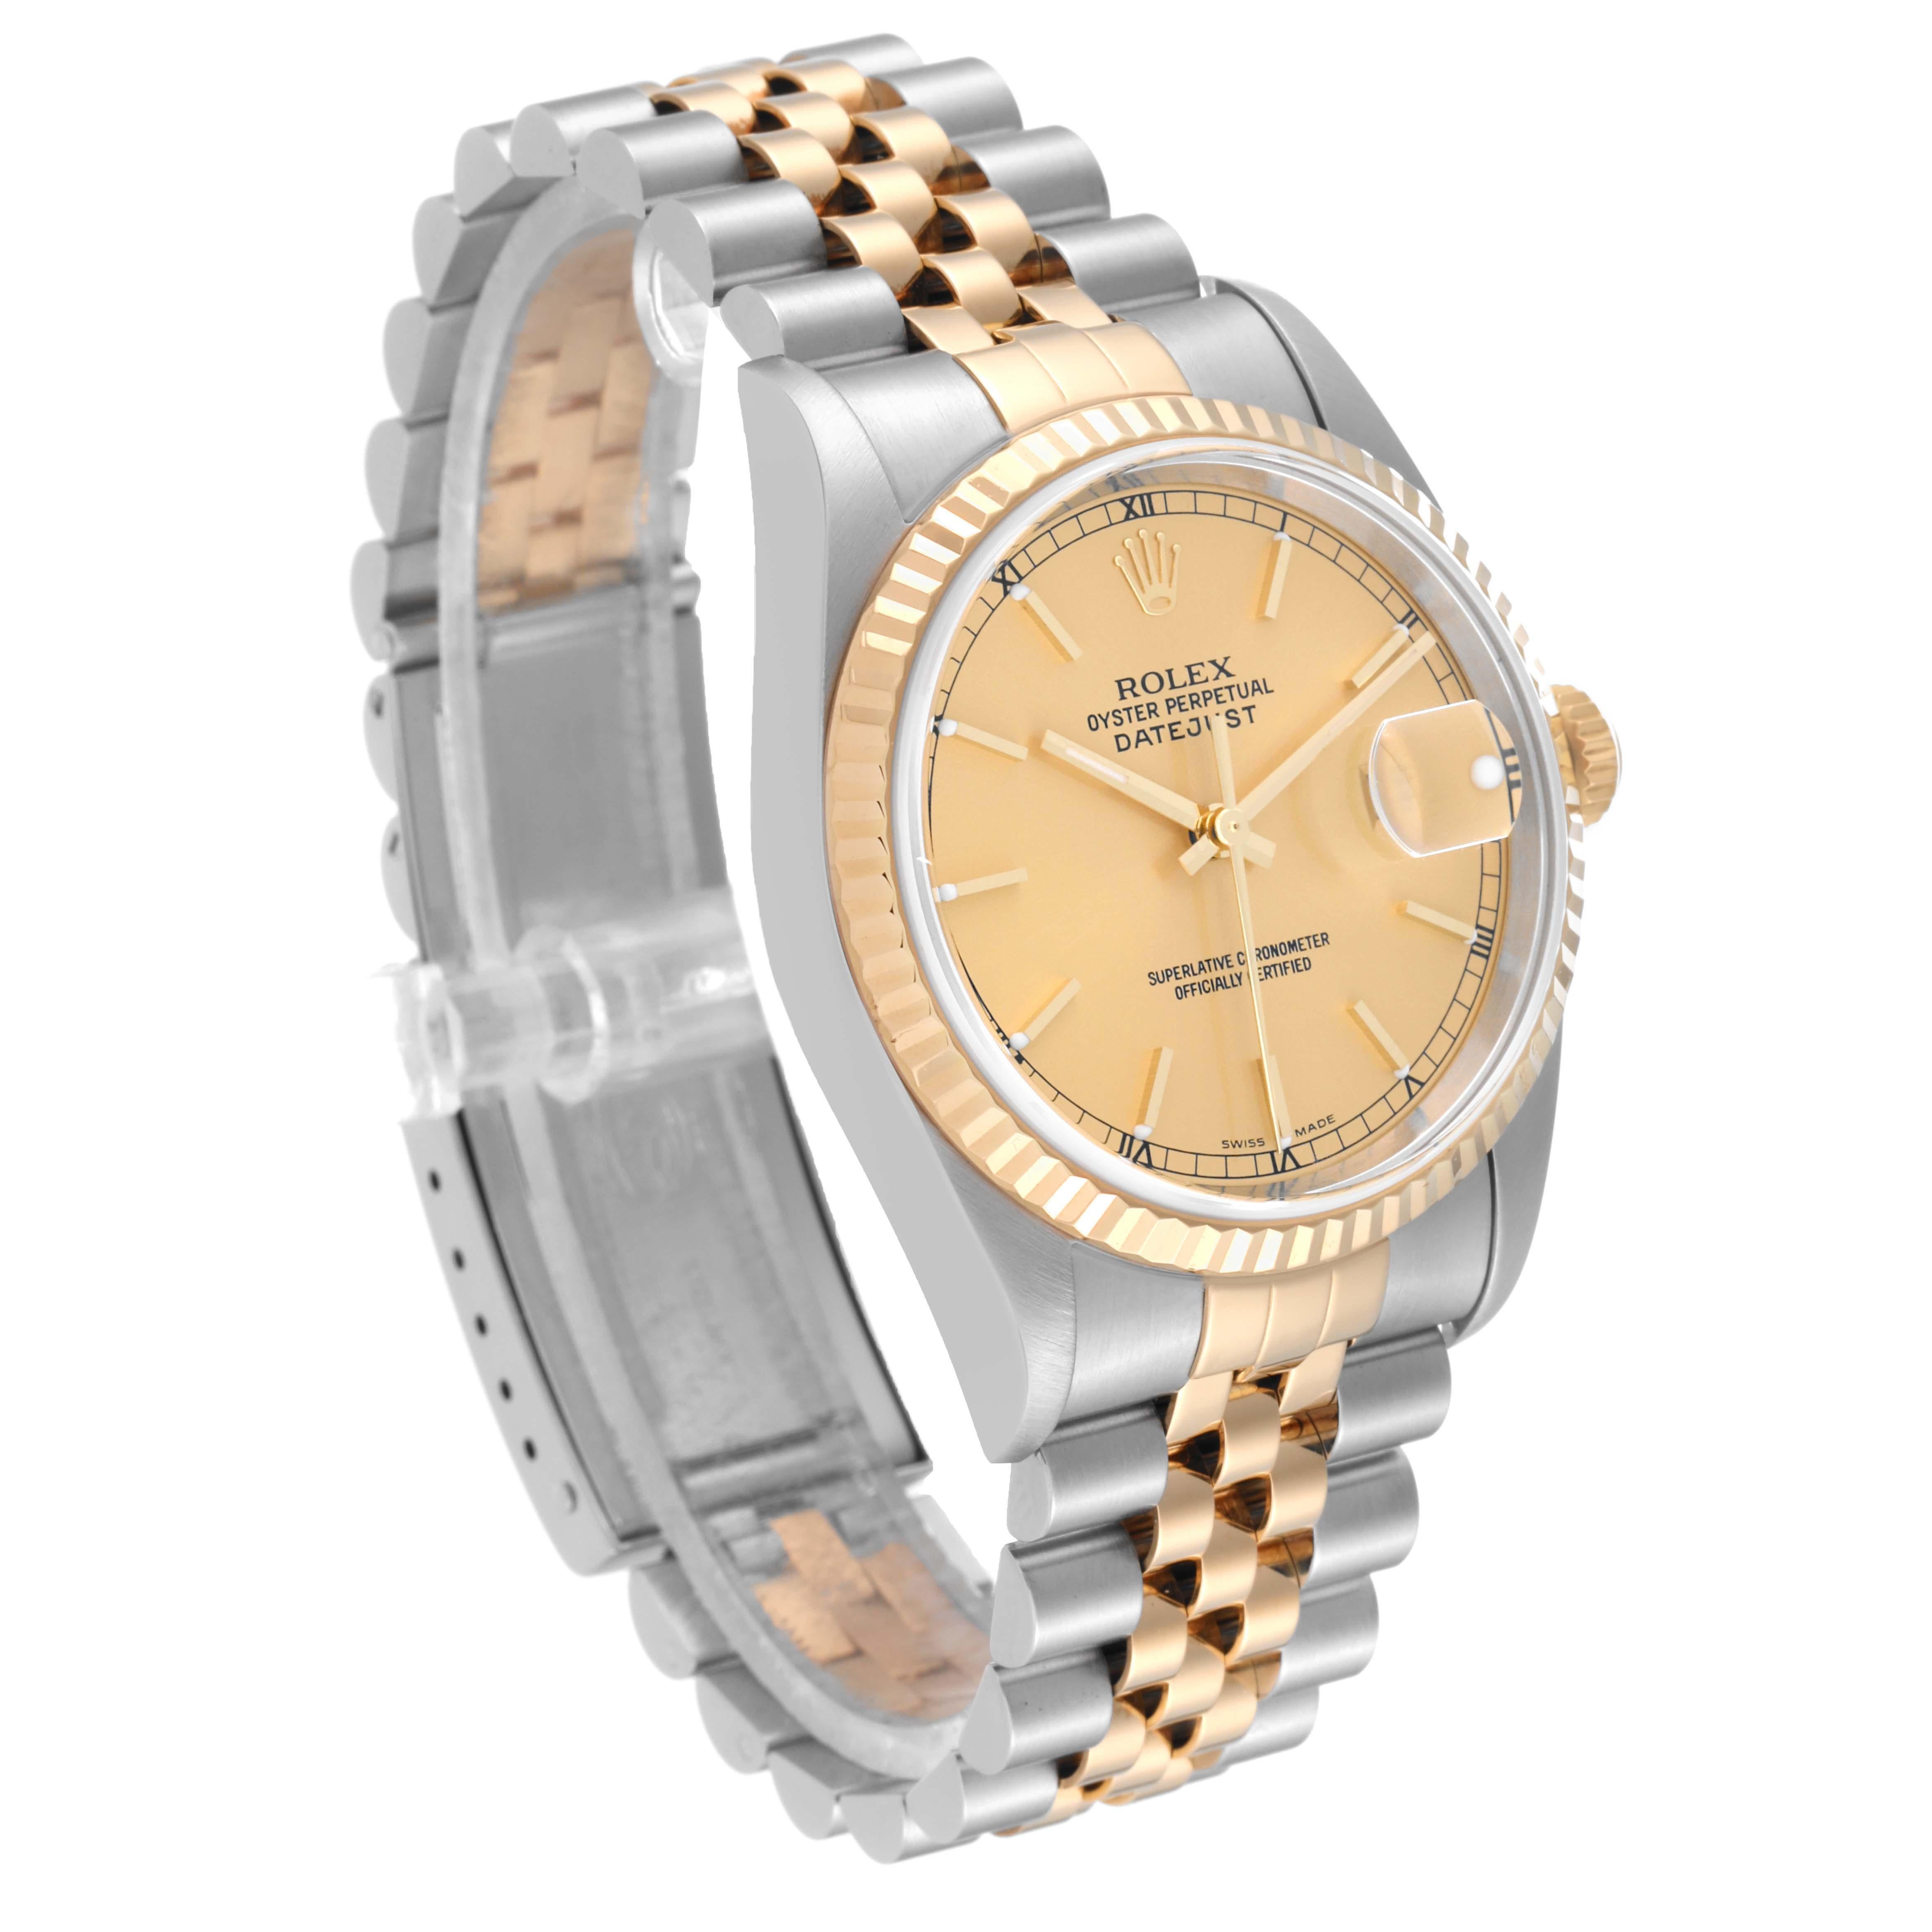 Rolex Datejust 36 Steel Yellow Gold Champagne Dial Mens Watch 16233 Box Papers 2